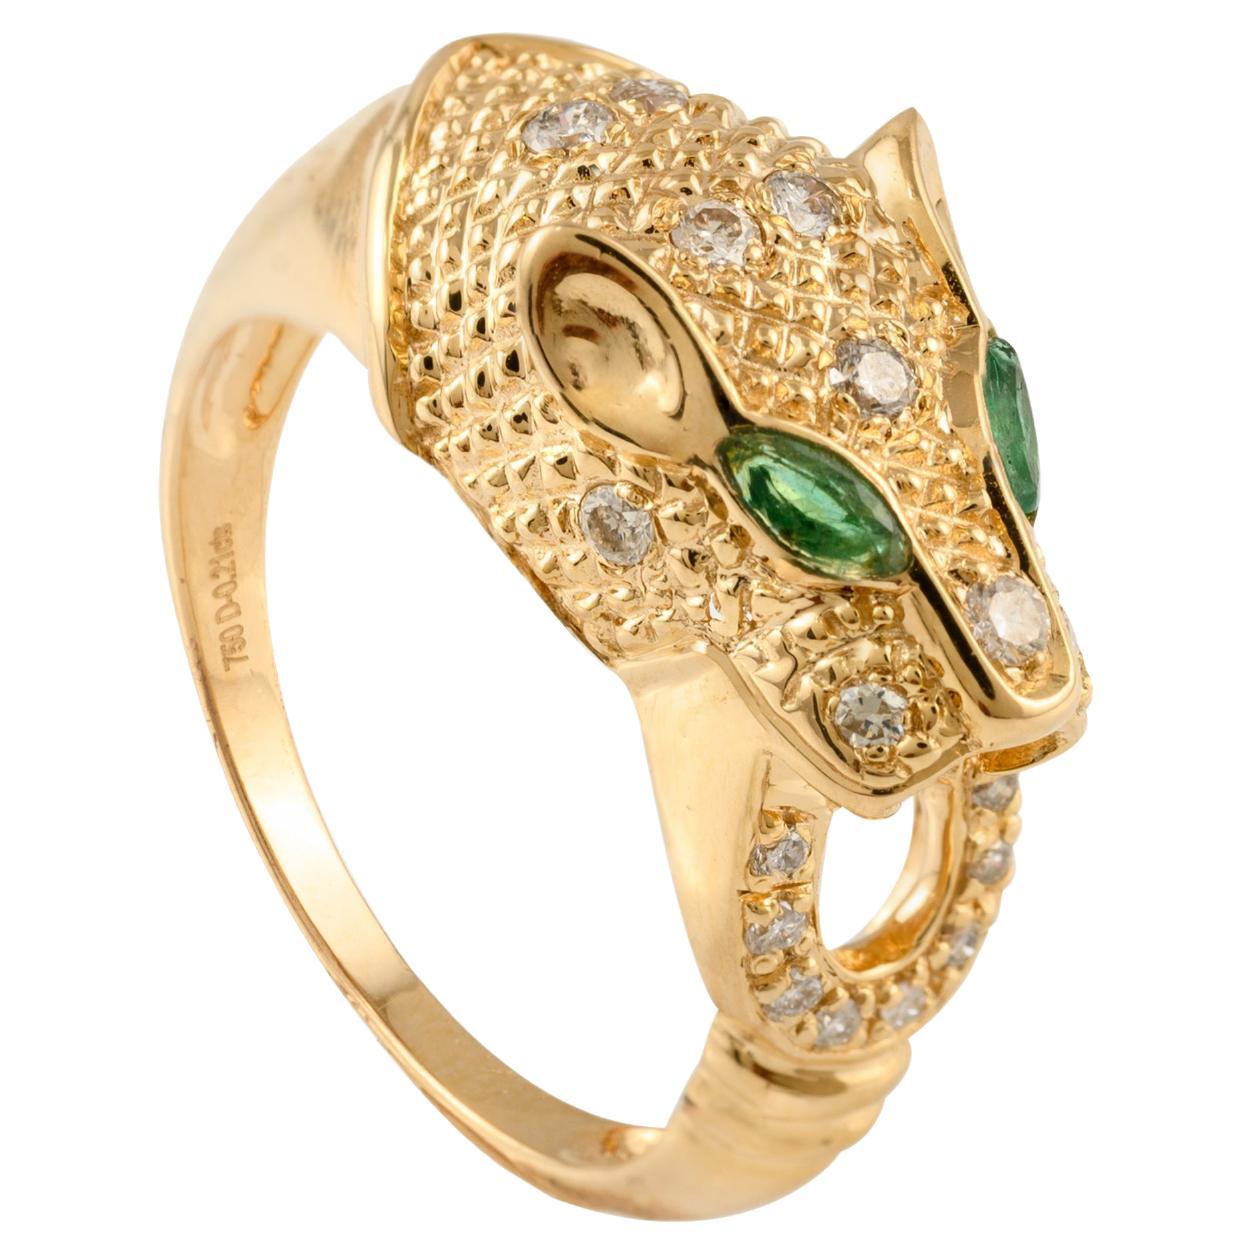 For Sale:  Vintage Panther Head Cocktail Ring Crafted in 18k Solid Yellow Gold